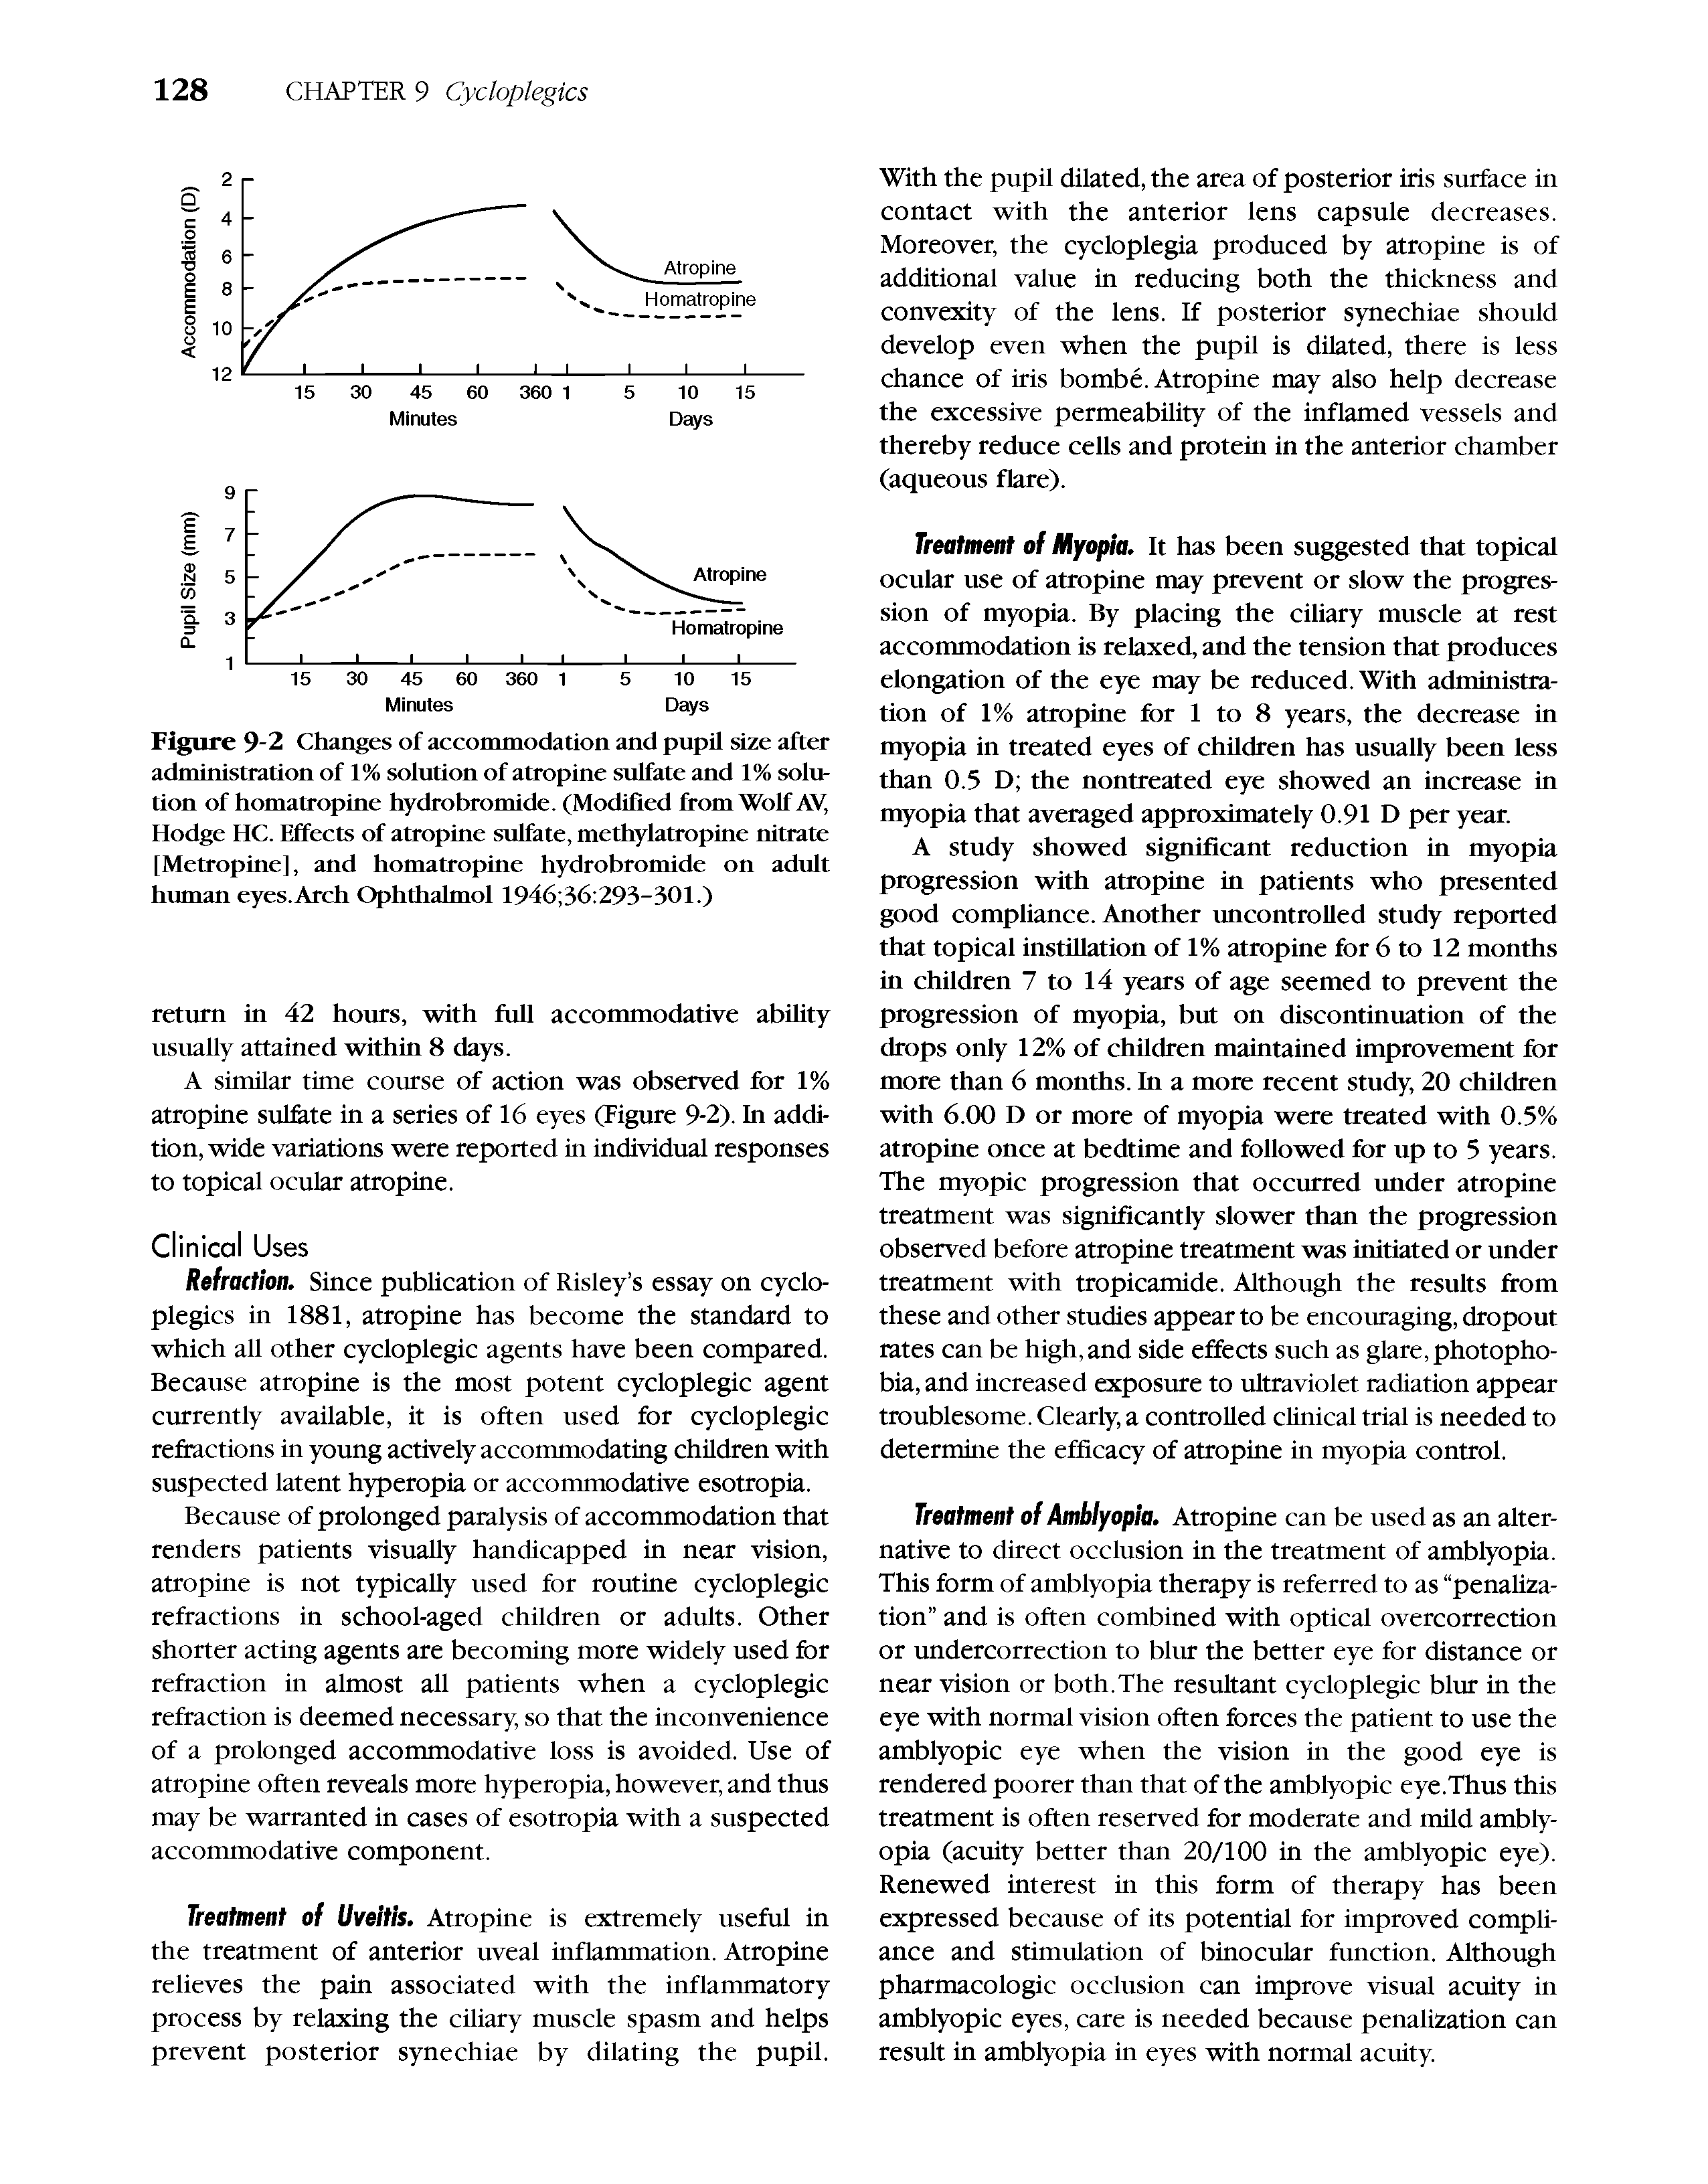 Figure 9-2 Changes of accommodation and pupil size after administration of 1% solution of atropine sulfate and 1% solution of homatropine hydrobromide. (Modified from Wolf AV, Hodge HC. Effects of atropine sulfate, methylatropine nitrate [Metropine], and homatropine hydrobromide on adult human eyes. Arch Ophthalmol 1946 36 293-301.)...